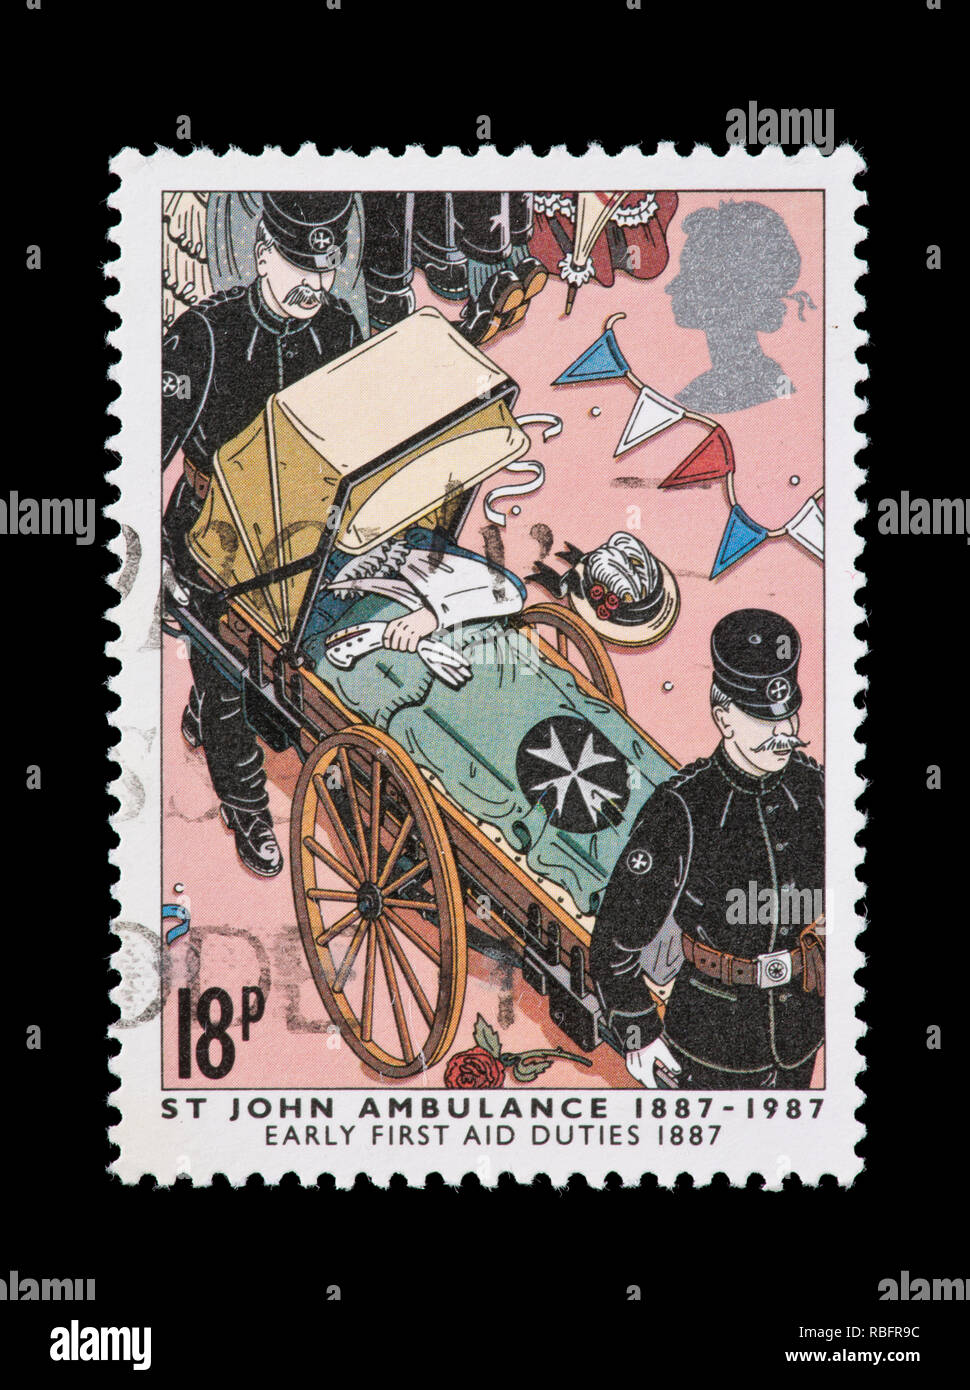 Postage stamp from Great Britain depicting a St. John ambulance, centennial of founding. Stock Photo